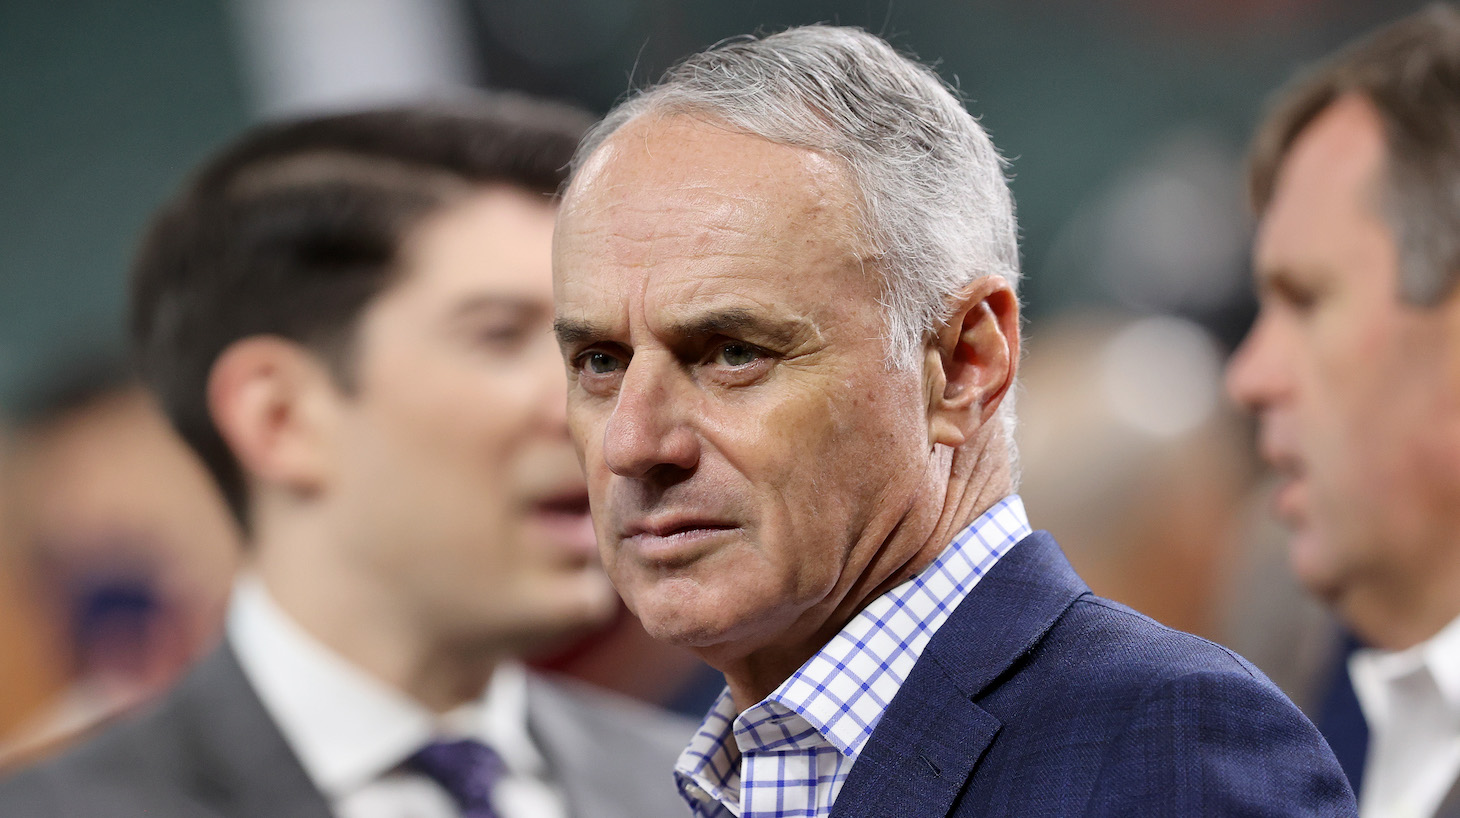 HOUSTON, TEXAS - OCTOBER 26: Major League Baseball Commissioner Rob Manfred looks on prior to Game One of the World Series between the Atlanta Braves and the Houston Astros at Minute Maid Park on October 26, 2021 in Houston, Texas. (Photo by Bob Levey/Getty Images)